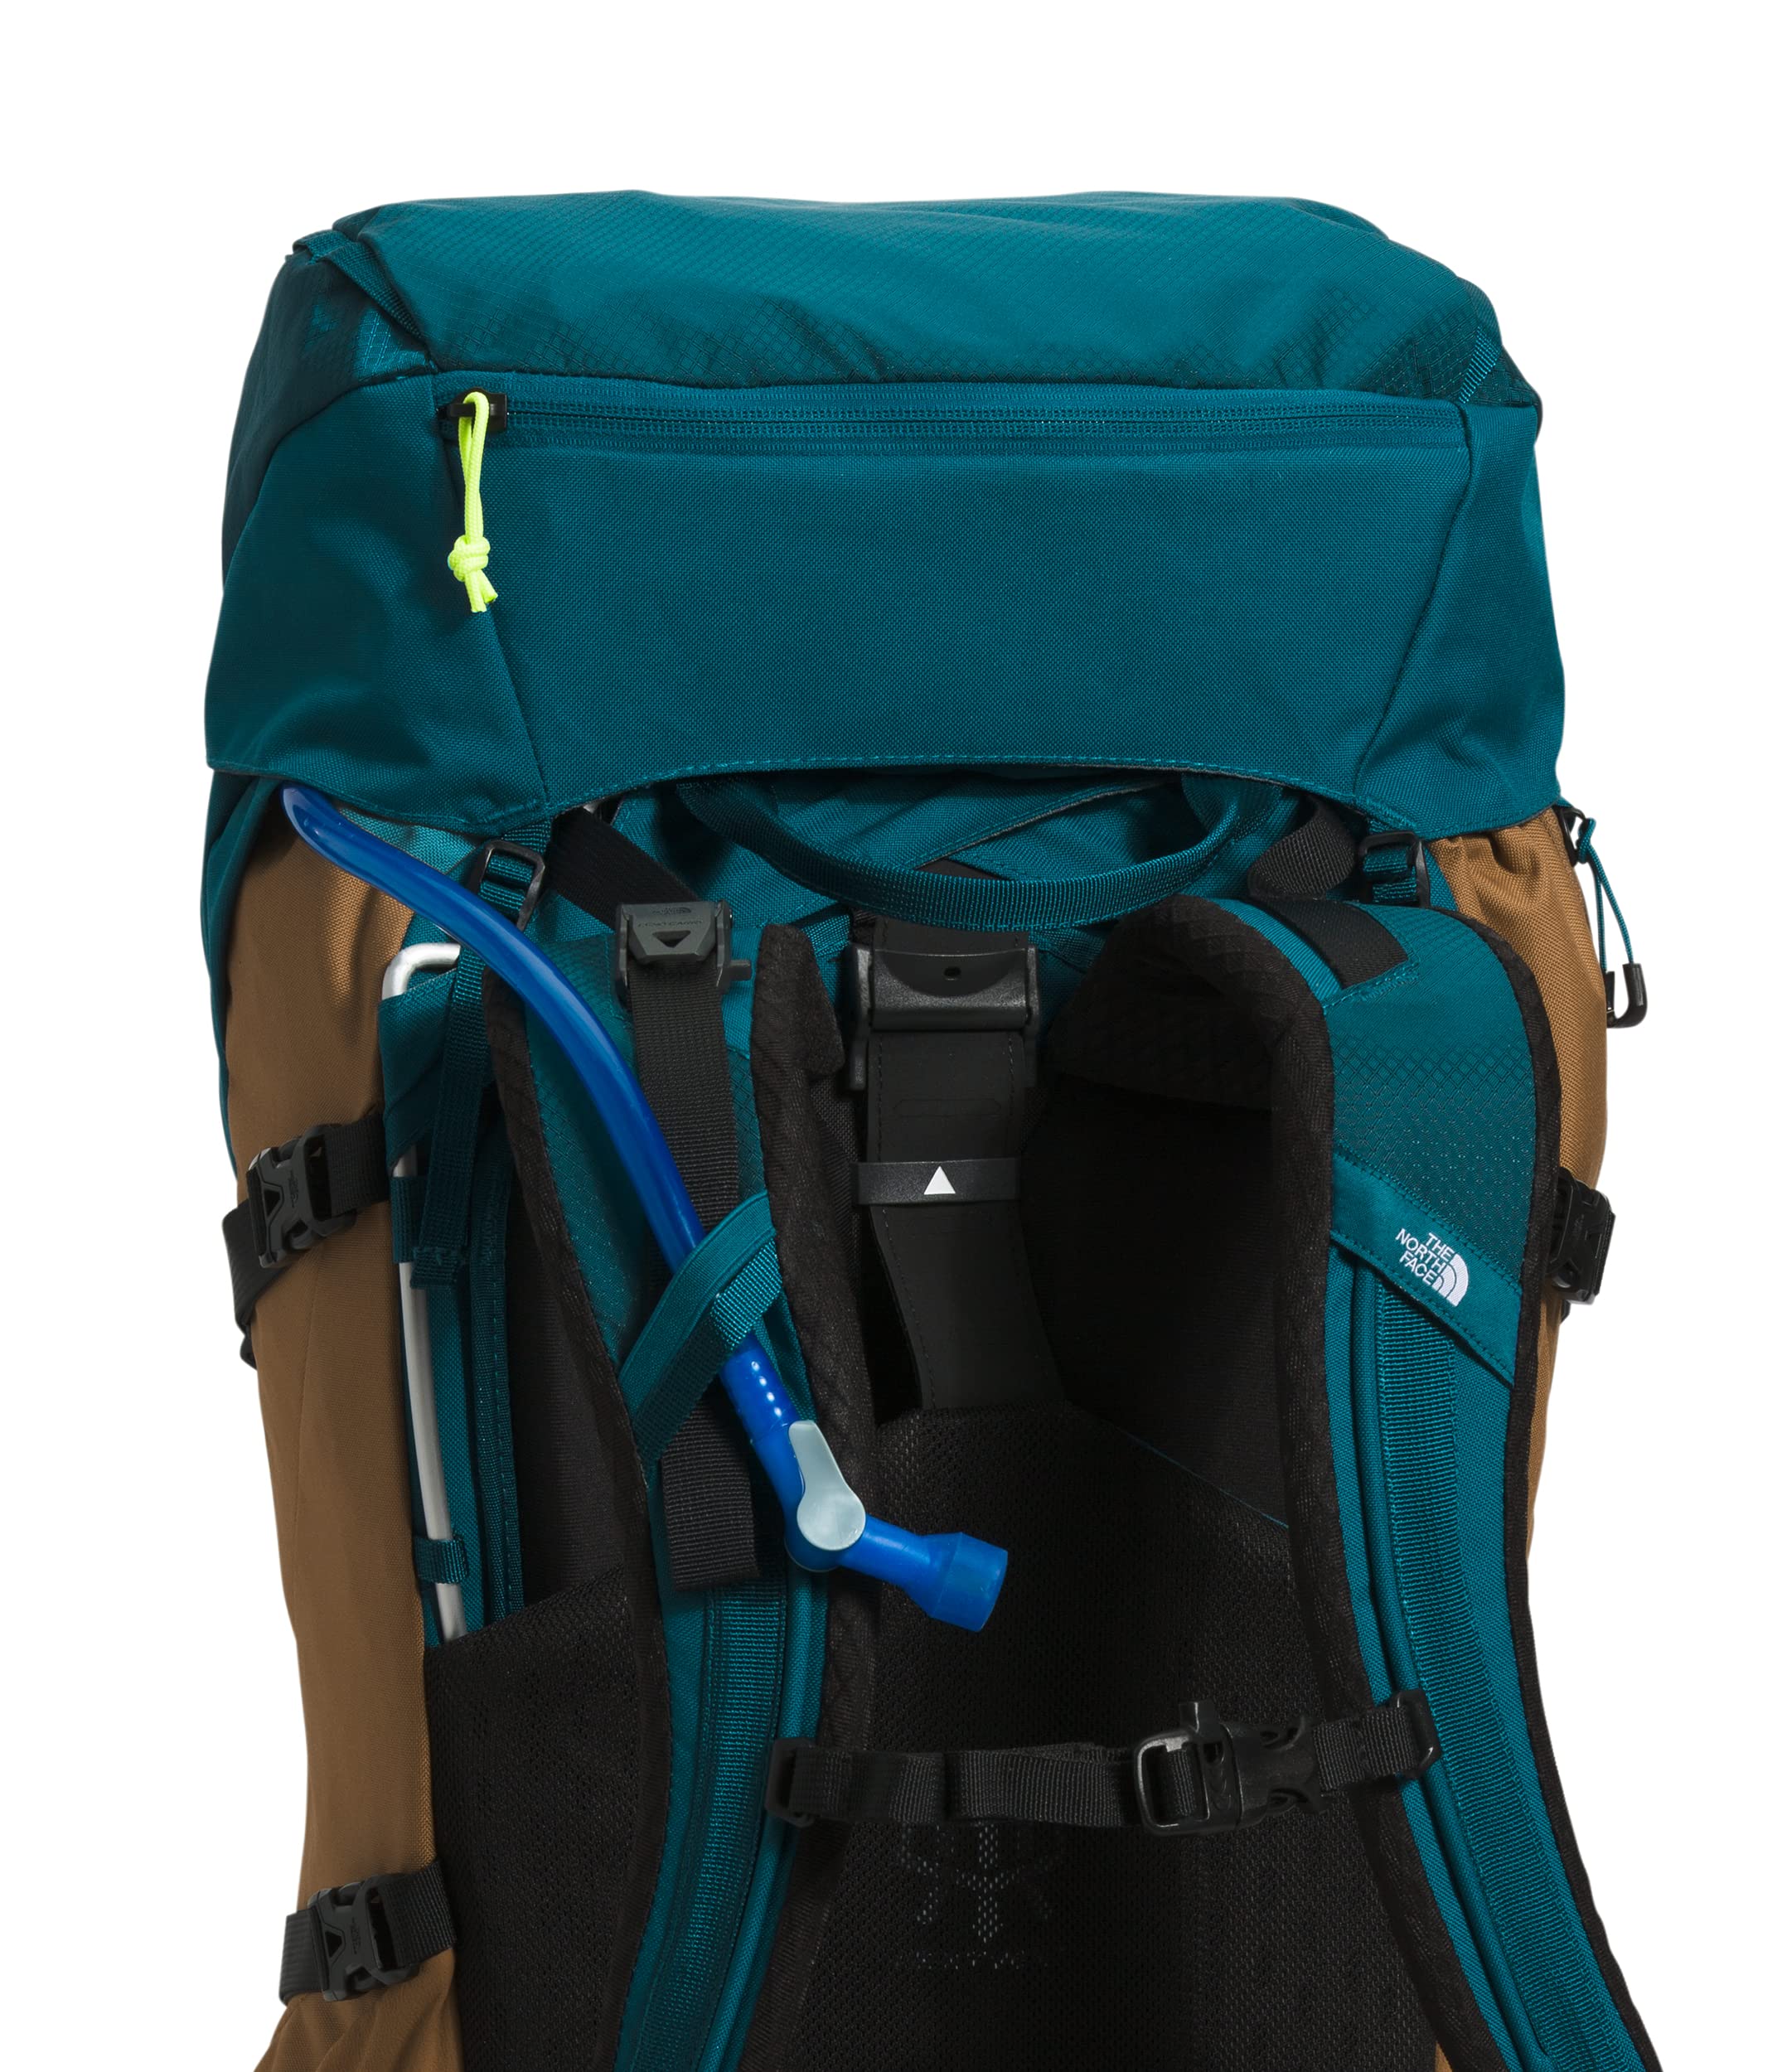 THE NORTH FACE Terra 65 L Backpacking Backpack, Blue Coral/Utility Brown/Led Yellow, L-XL 65L